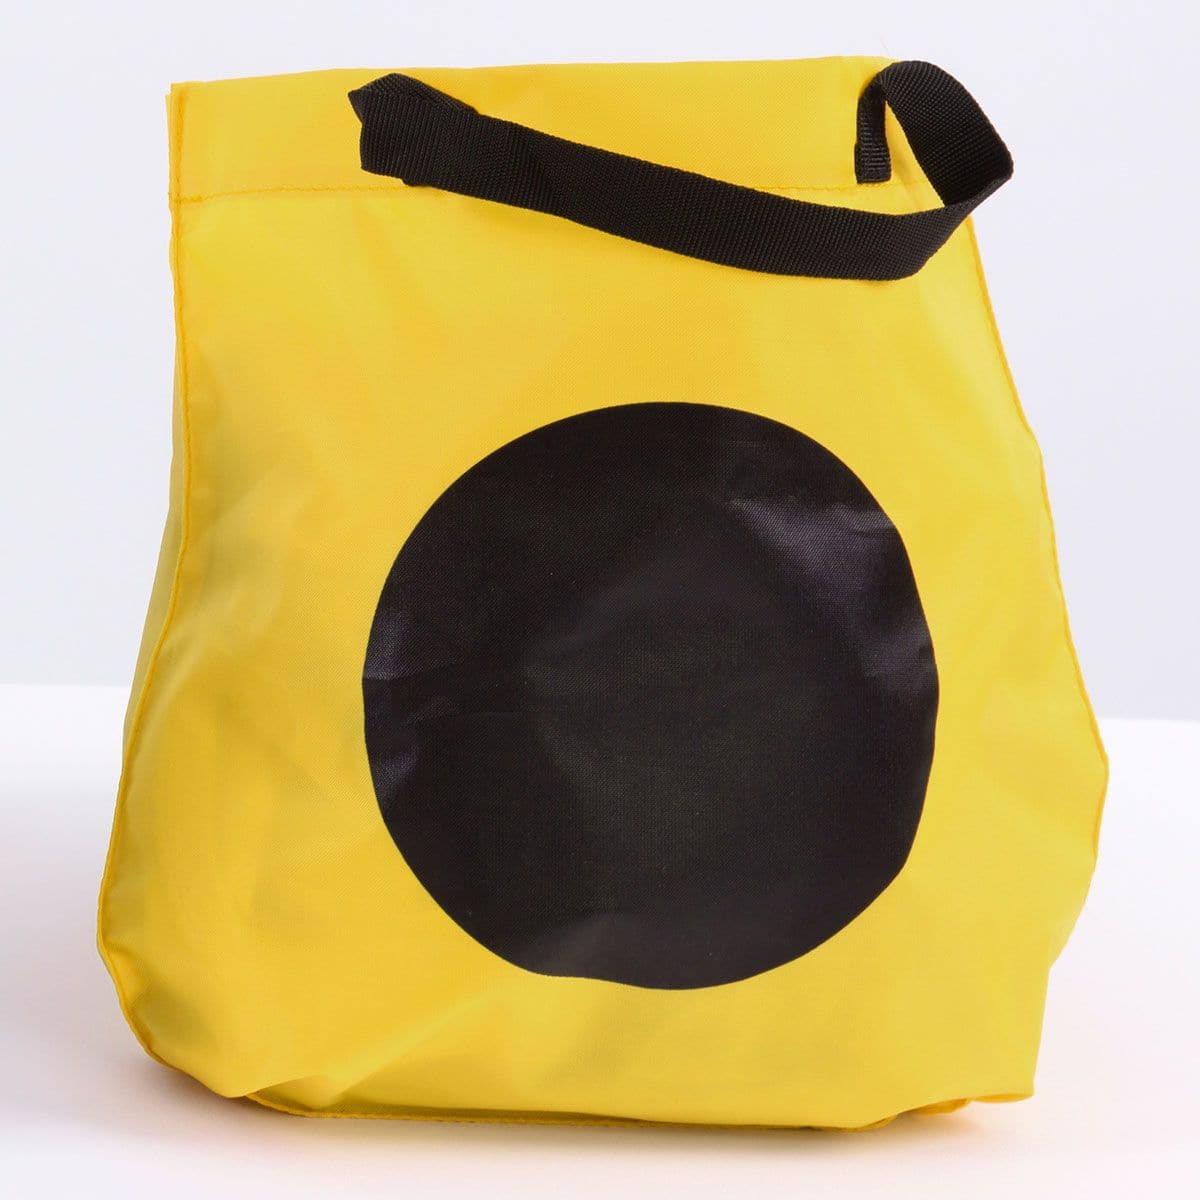 Shape Sorting Bags, These sturdy, large, tote style Shape Sorting Bags are perfect for children that love to find and collect objects. Each set of Shape Sorting Bags comes with bags in 4 colours with a shape on one side (circle, square, rectangle or triangle) and blank on reverse. Collect objects to match the shapes and discover the different shapes found in your environments. The Shape Sorting Bags are perfect for use in early learning environments, where they can help children develop their cognitive and 